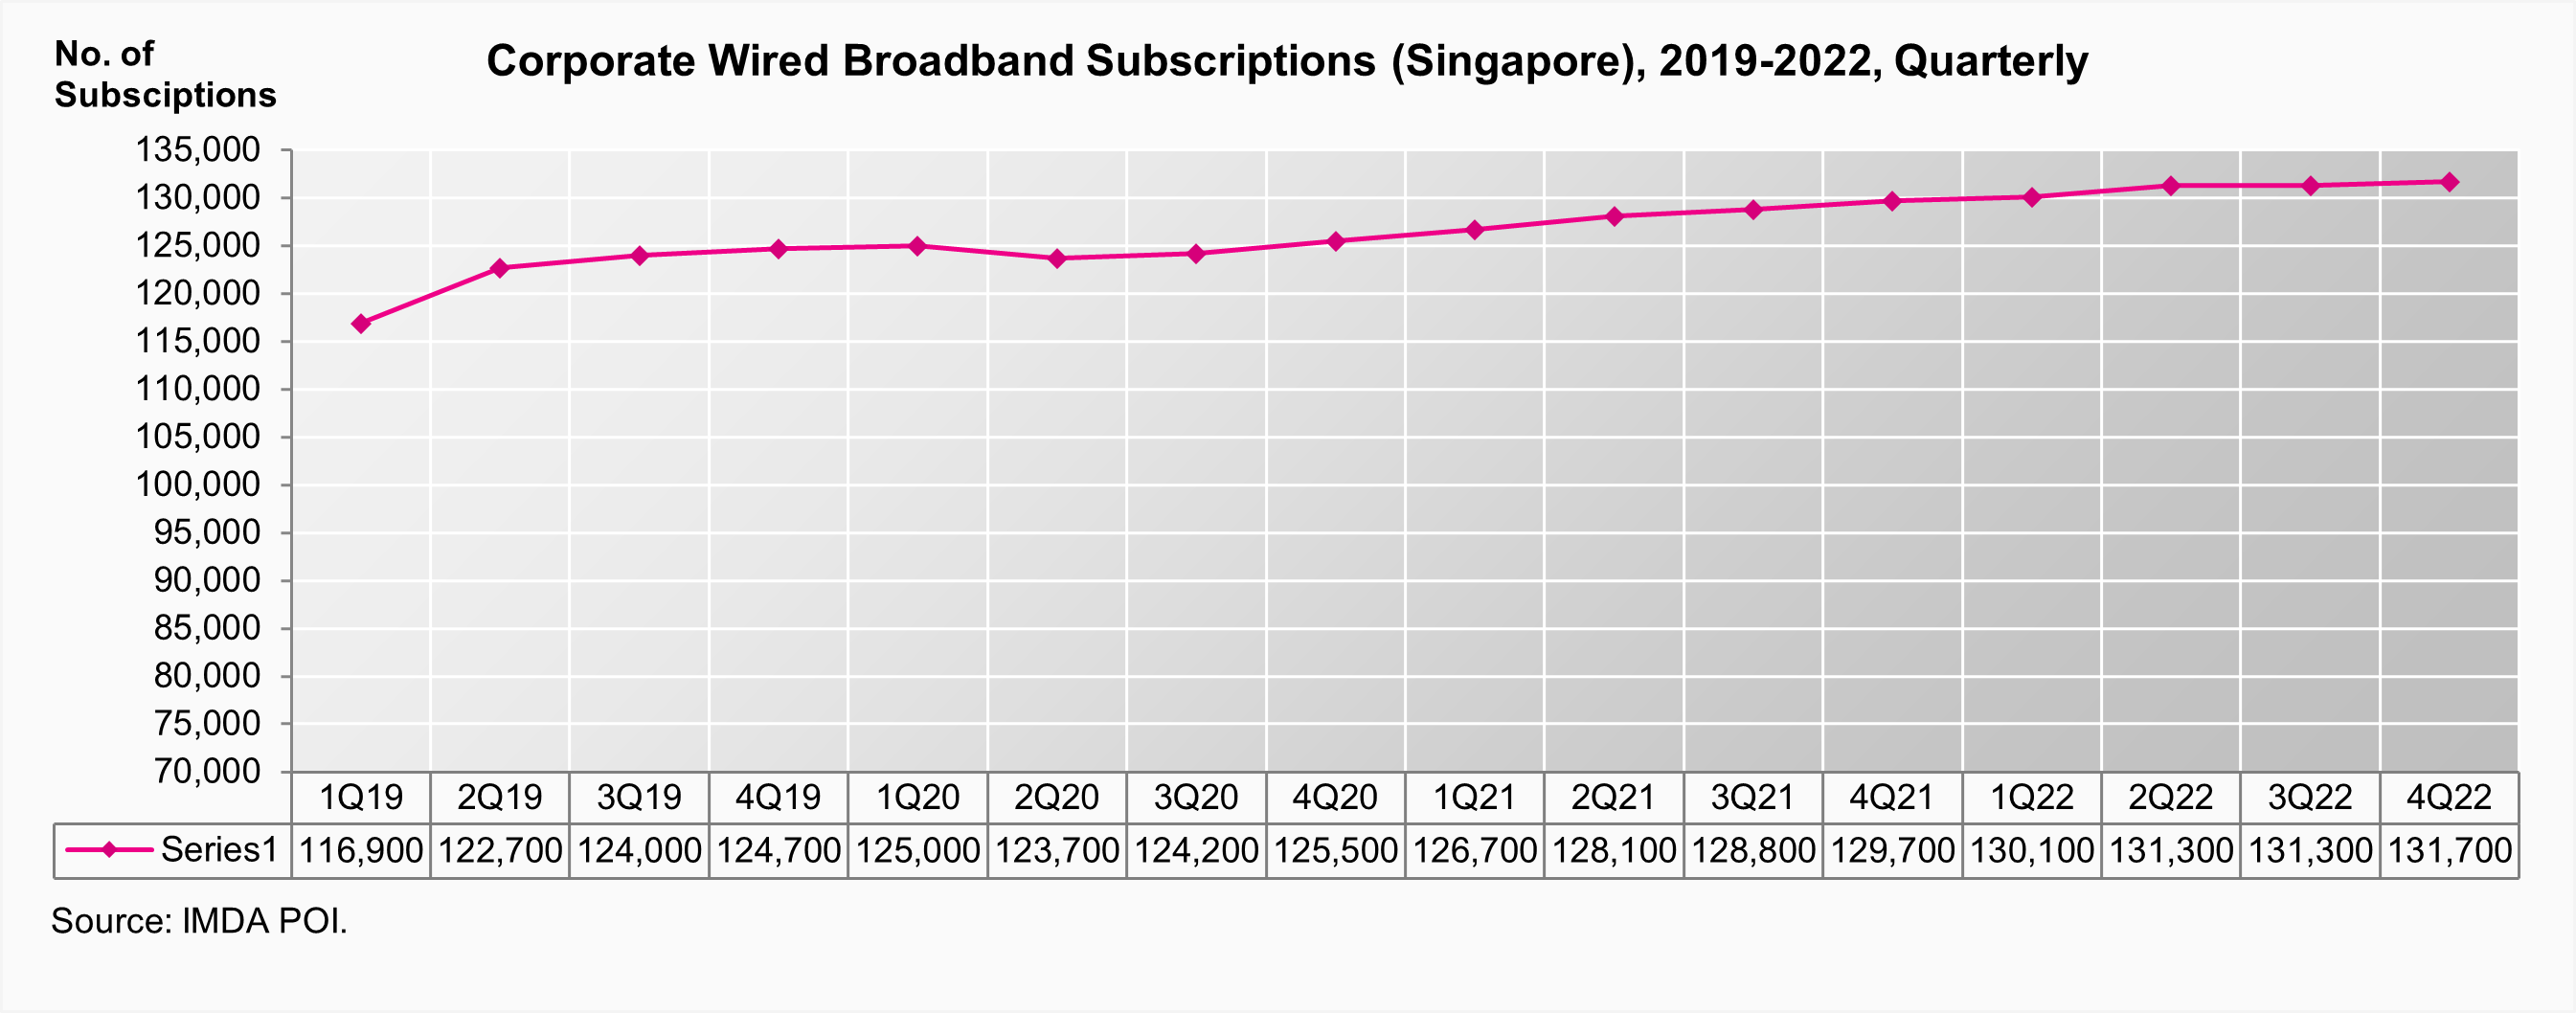 A Statistical Chart on Corporate Wired Broadband Subscriptions (Singapore) 2019-2022, Quarterly by IMDA POI